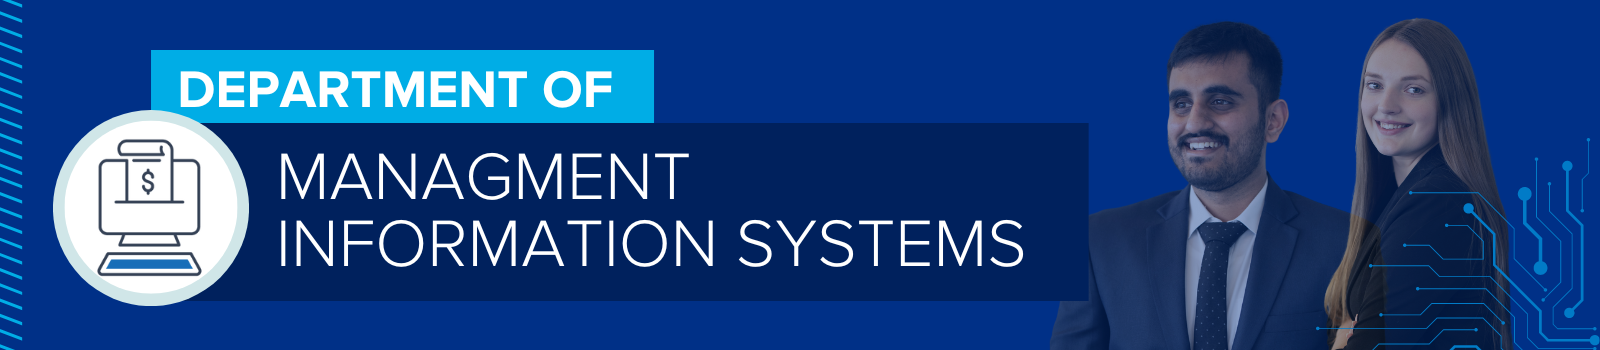 Department of Management Information Systems